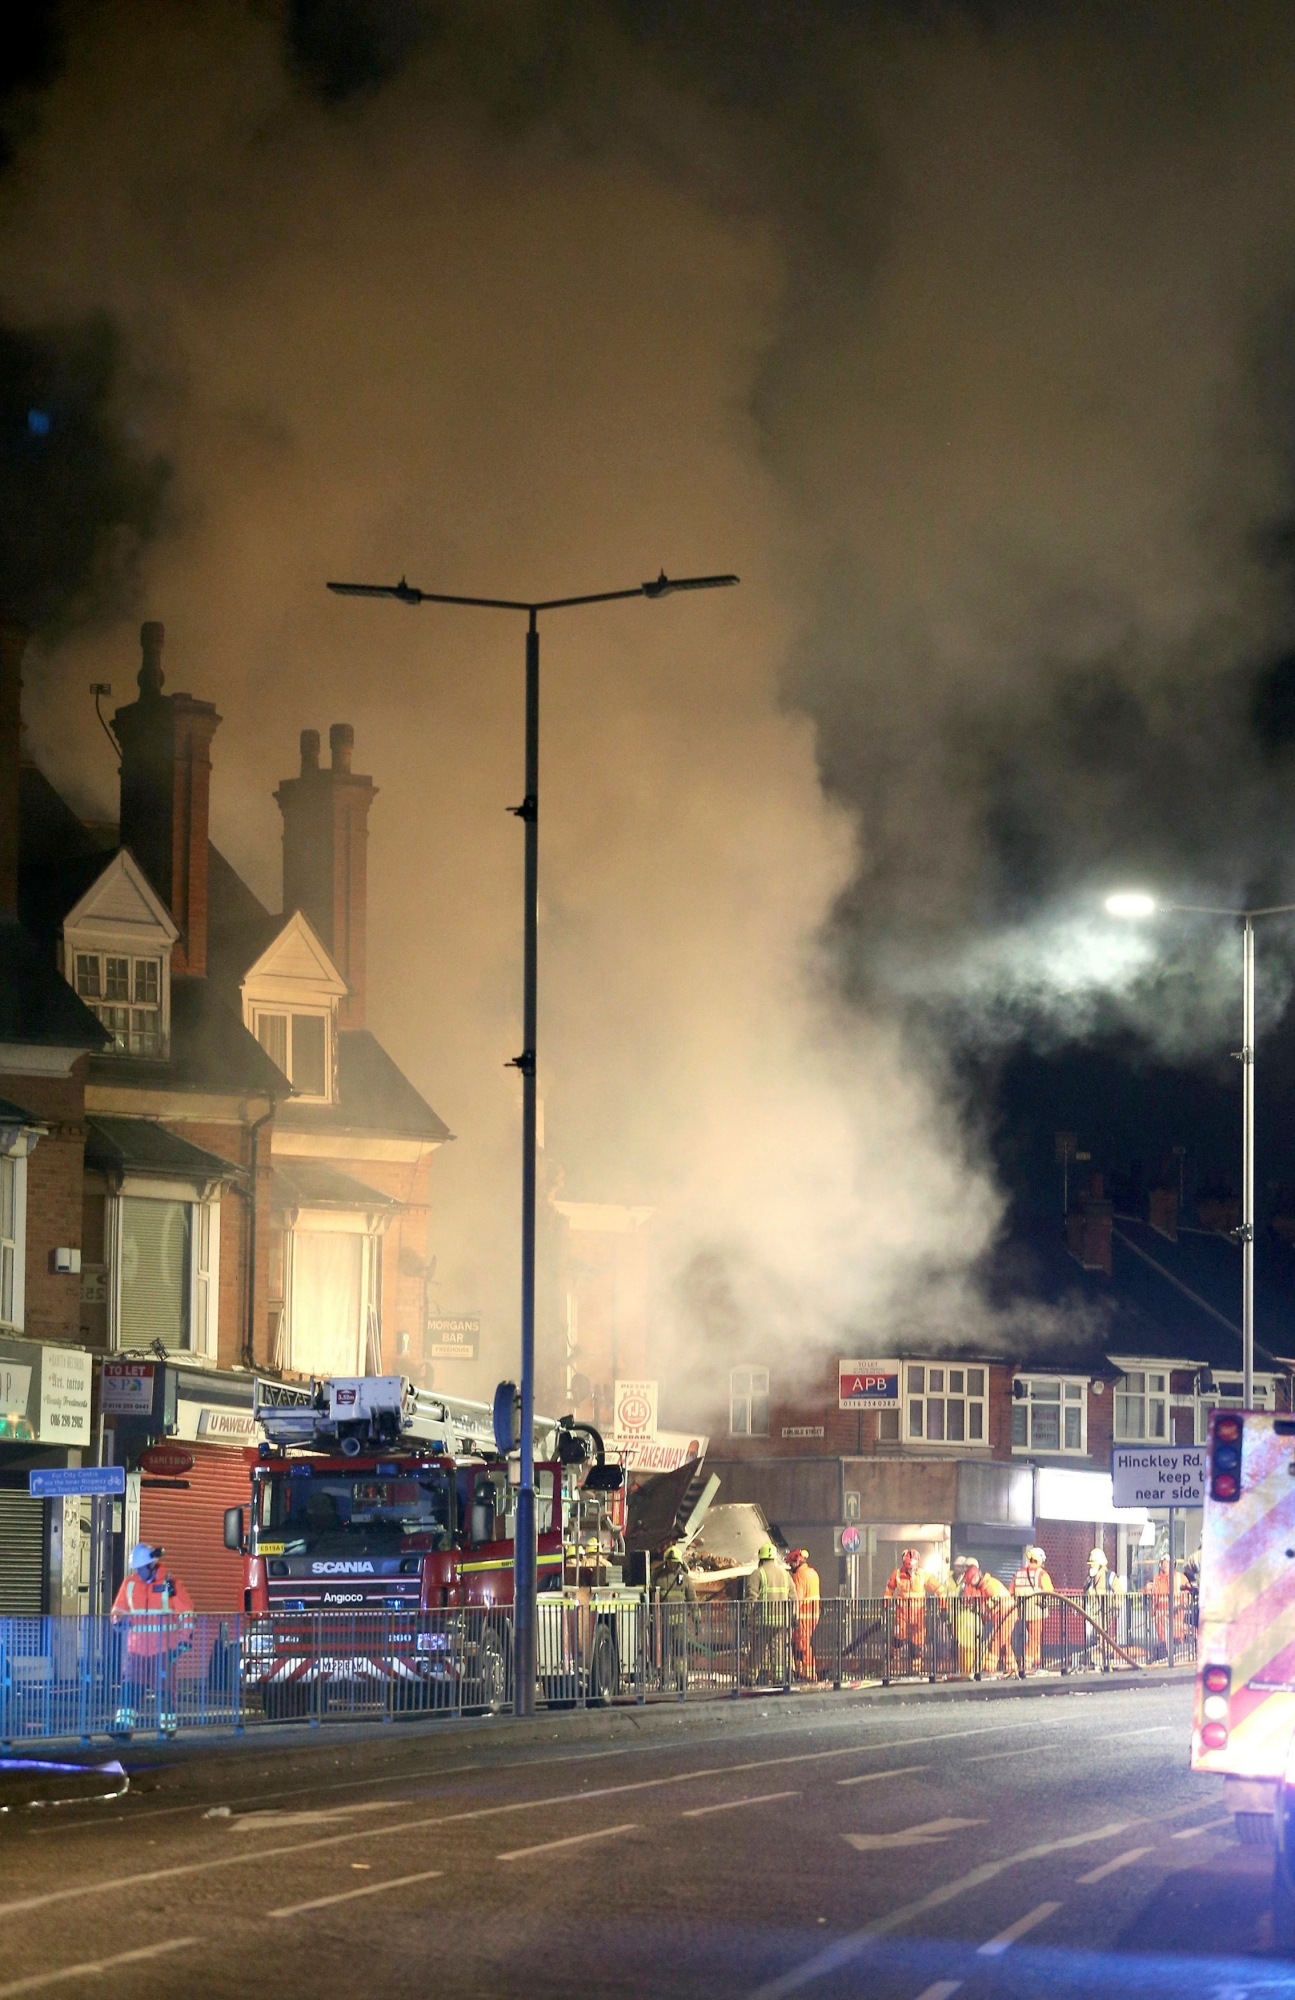 Emergency personnel attend the scene of an incident in Leicester, central England, Sunday Feb. 25, 2018. Four people were hospitalized in critical condition following an explosion that left a building in the English city of Leicester in flames Sunday, local emergency agencies said. (Aaron Chown/PA via AP) Britain City Explosion